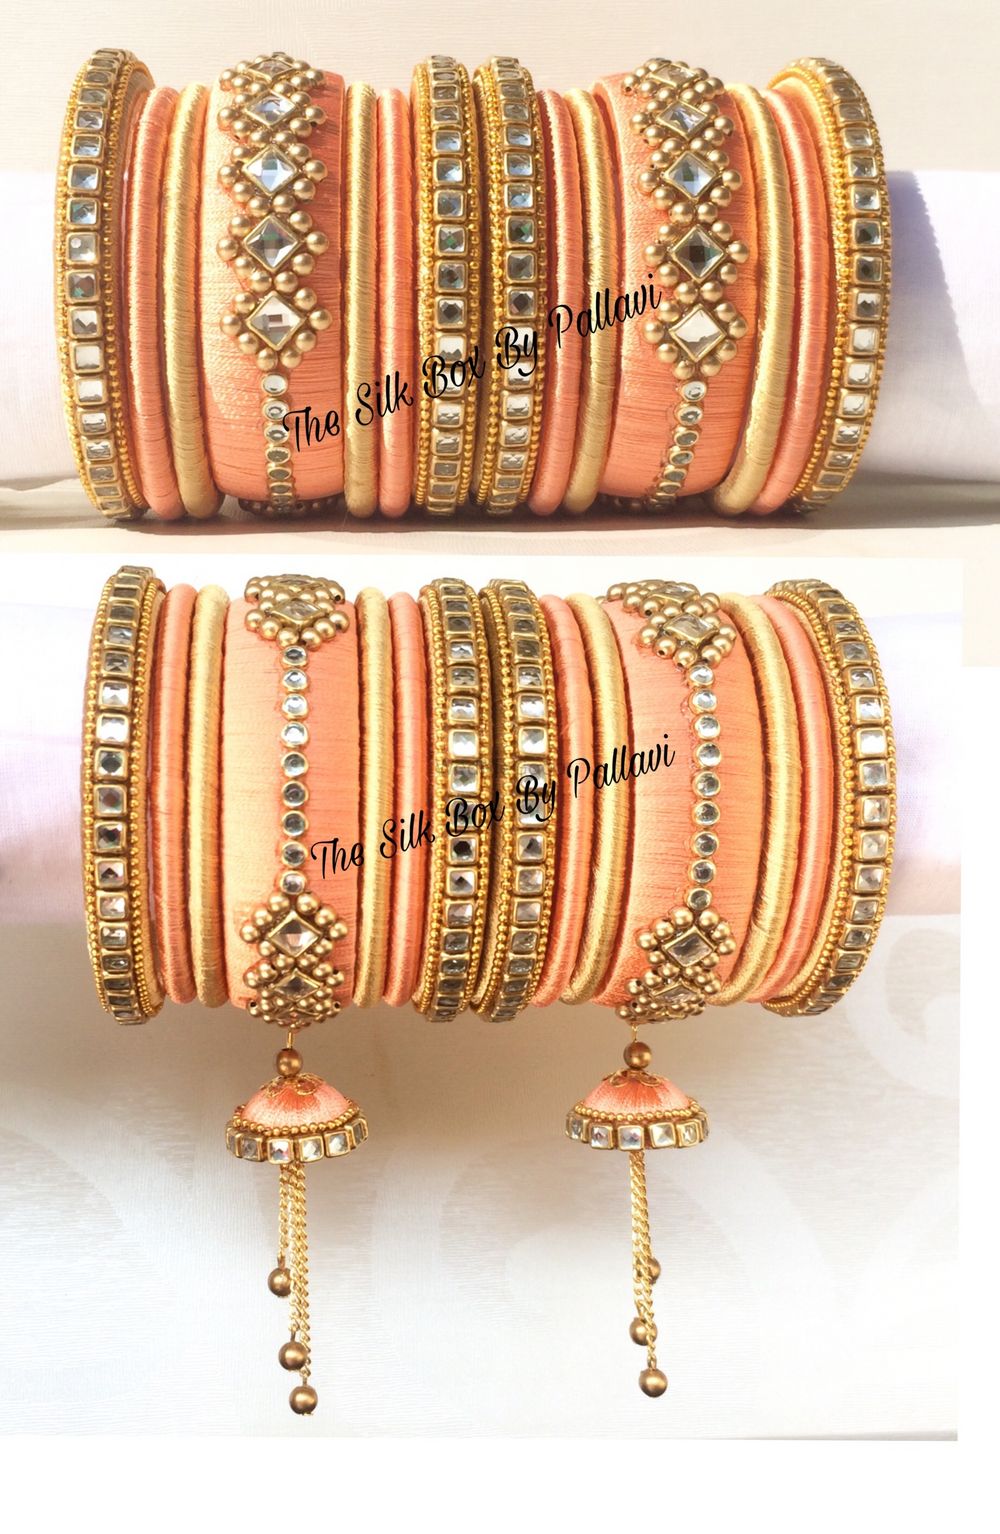 Photo From Bridal Bangles - By The Silk Box by Pallavi